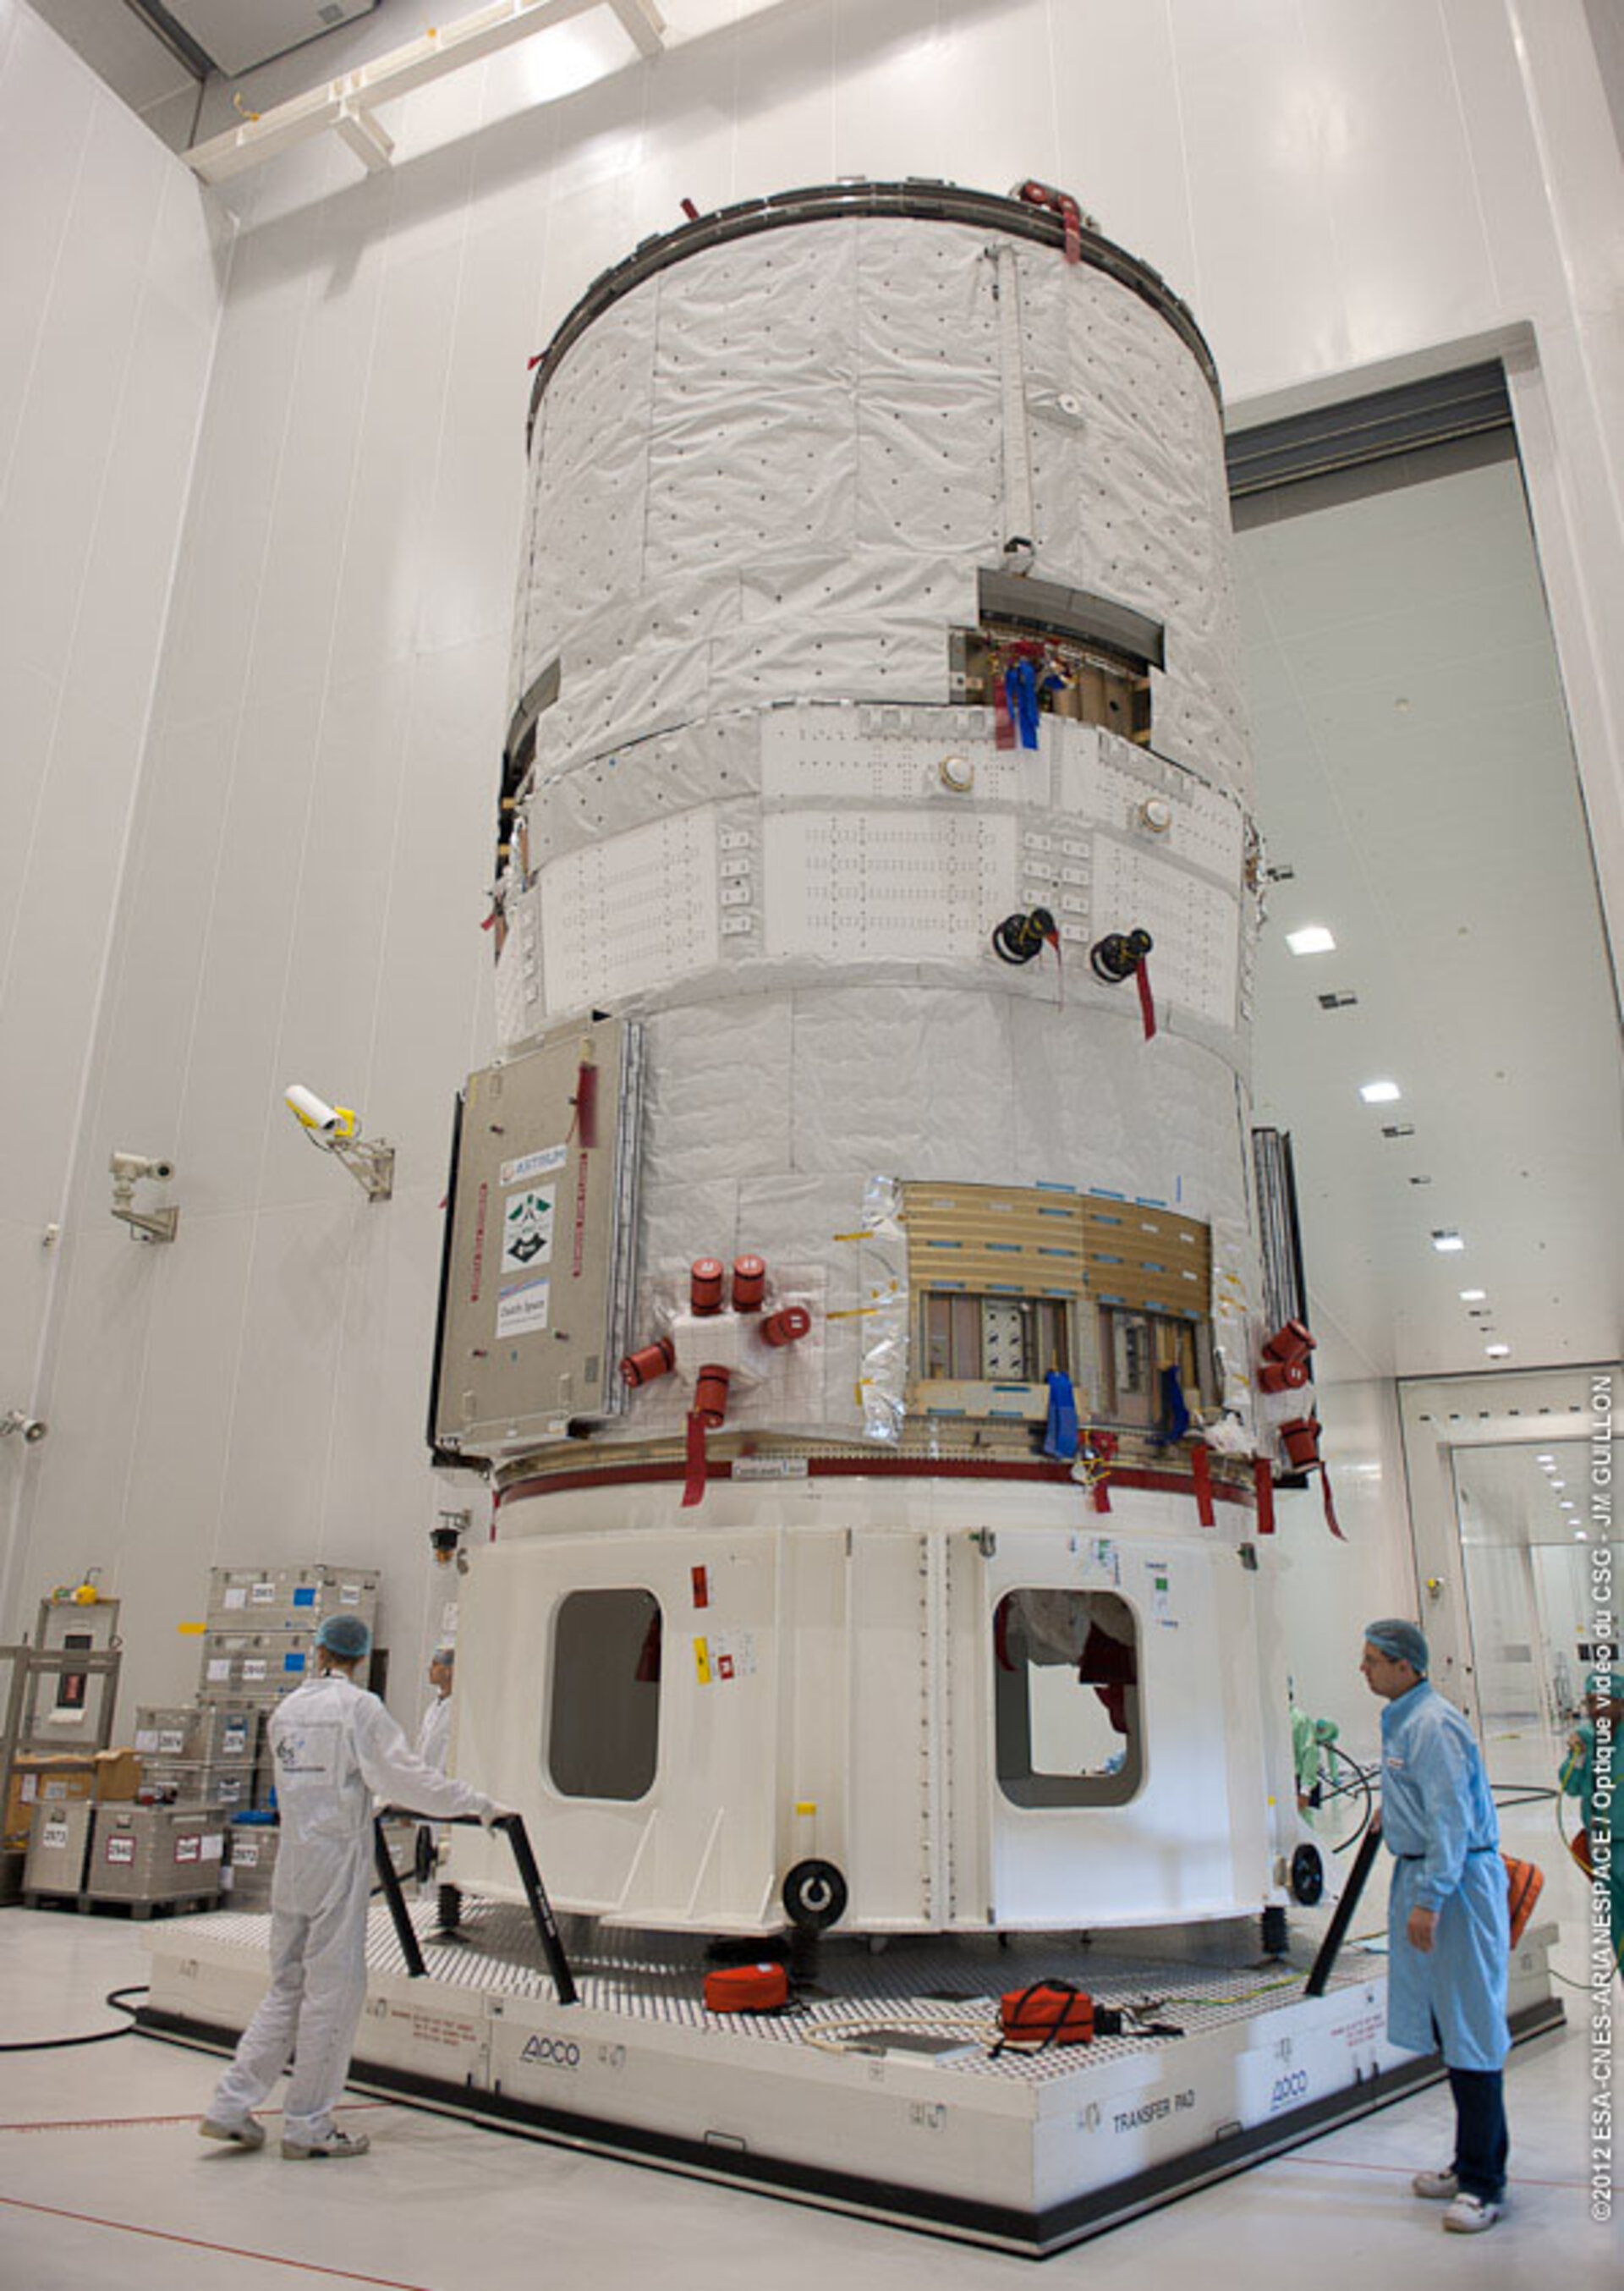 ATV-3 prepared for transfer to launchpad